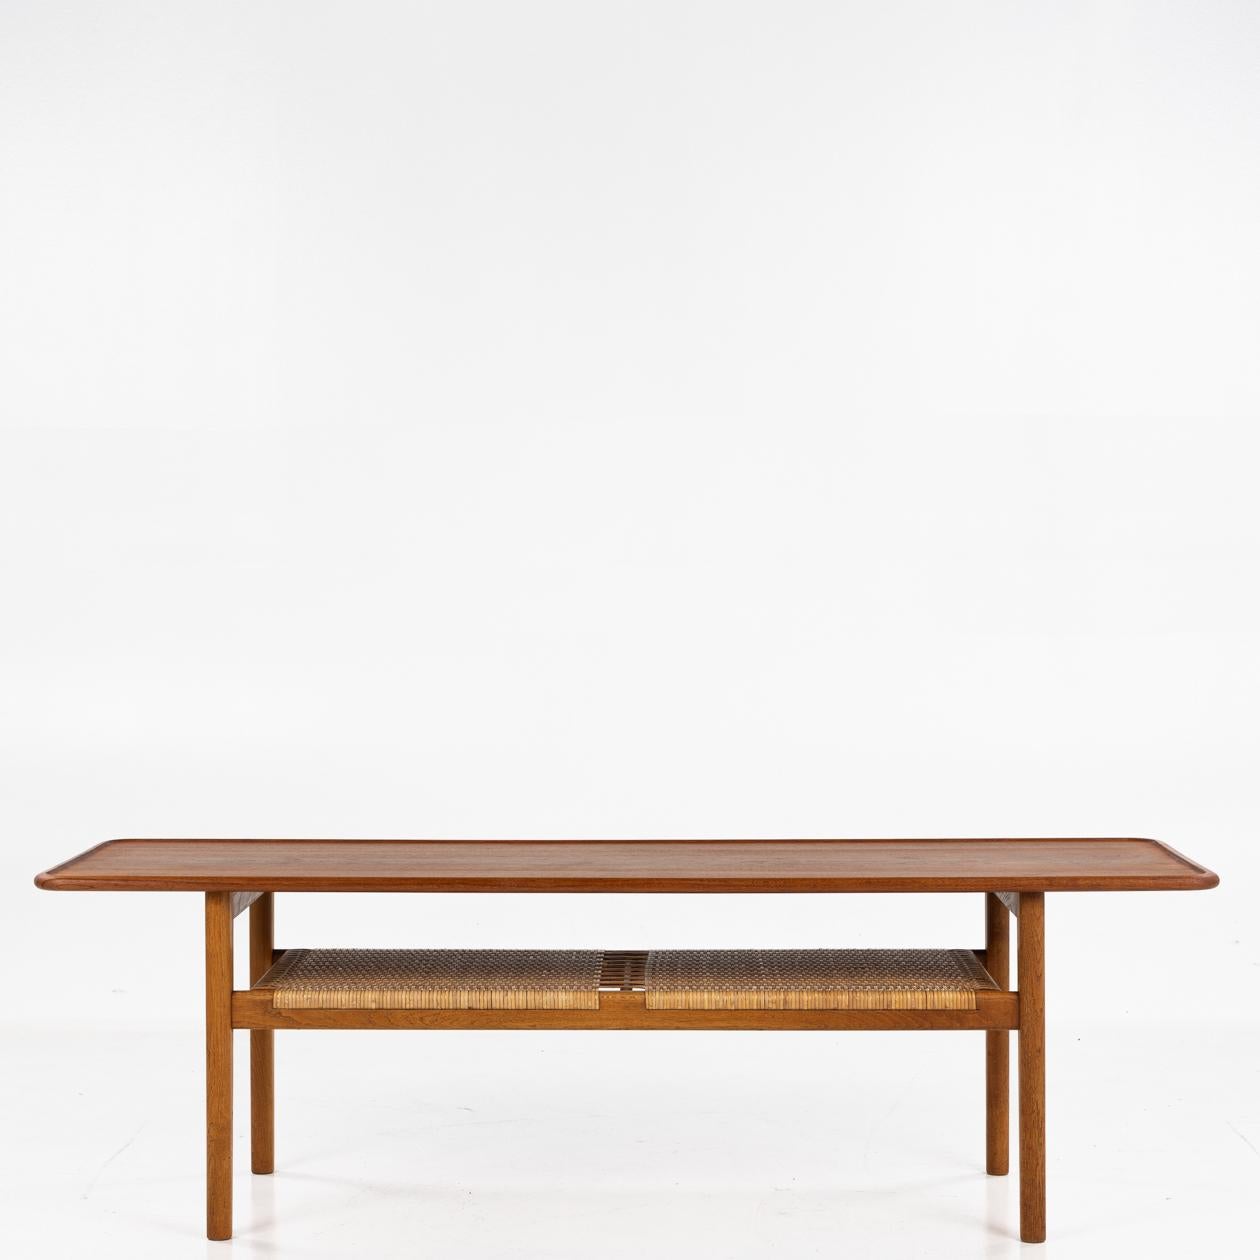 AT 10 - Coffee table in solid teak and oak frame with a shelf in cane.
Designed by Hans J. Wegner for cabinetmaker Andreas Tuck.